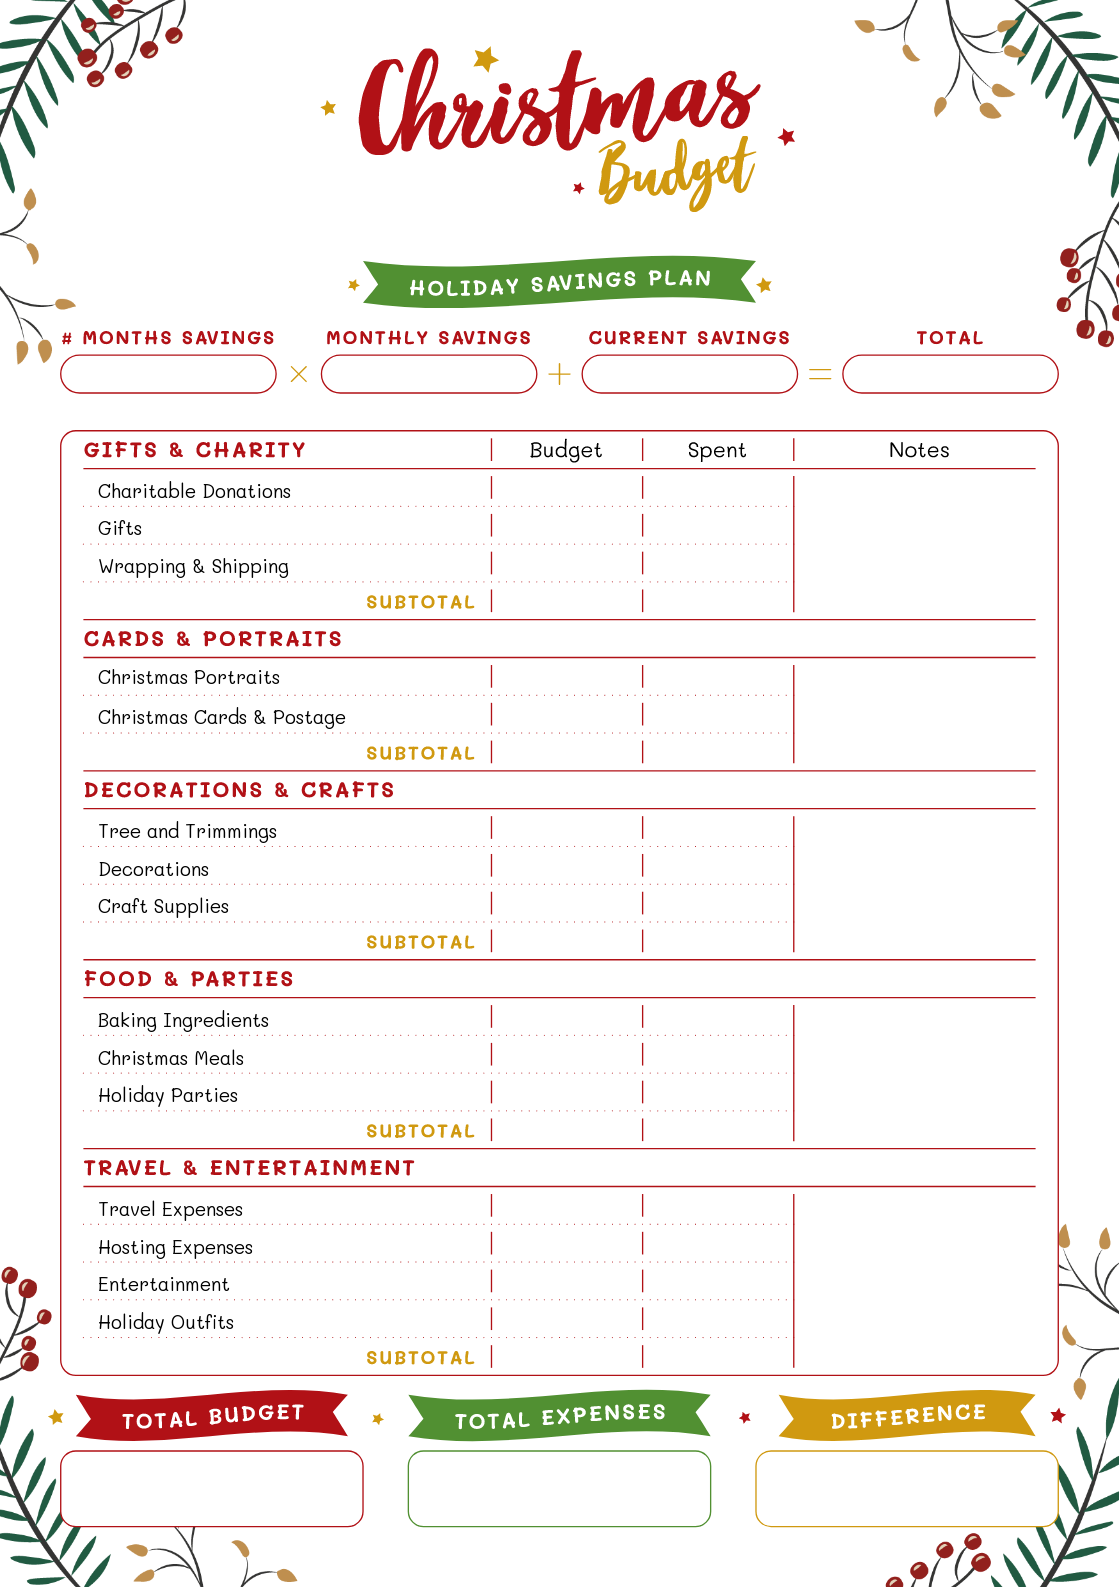 download-printable-christmas-party-planner-pdf